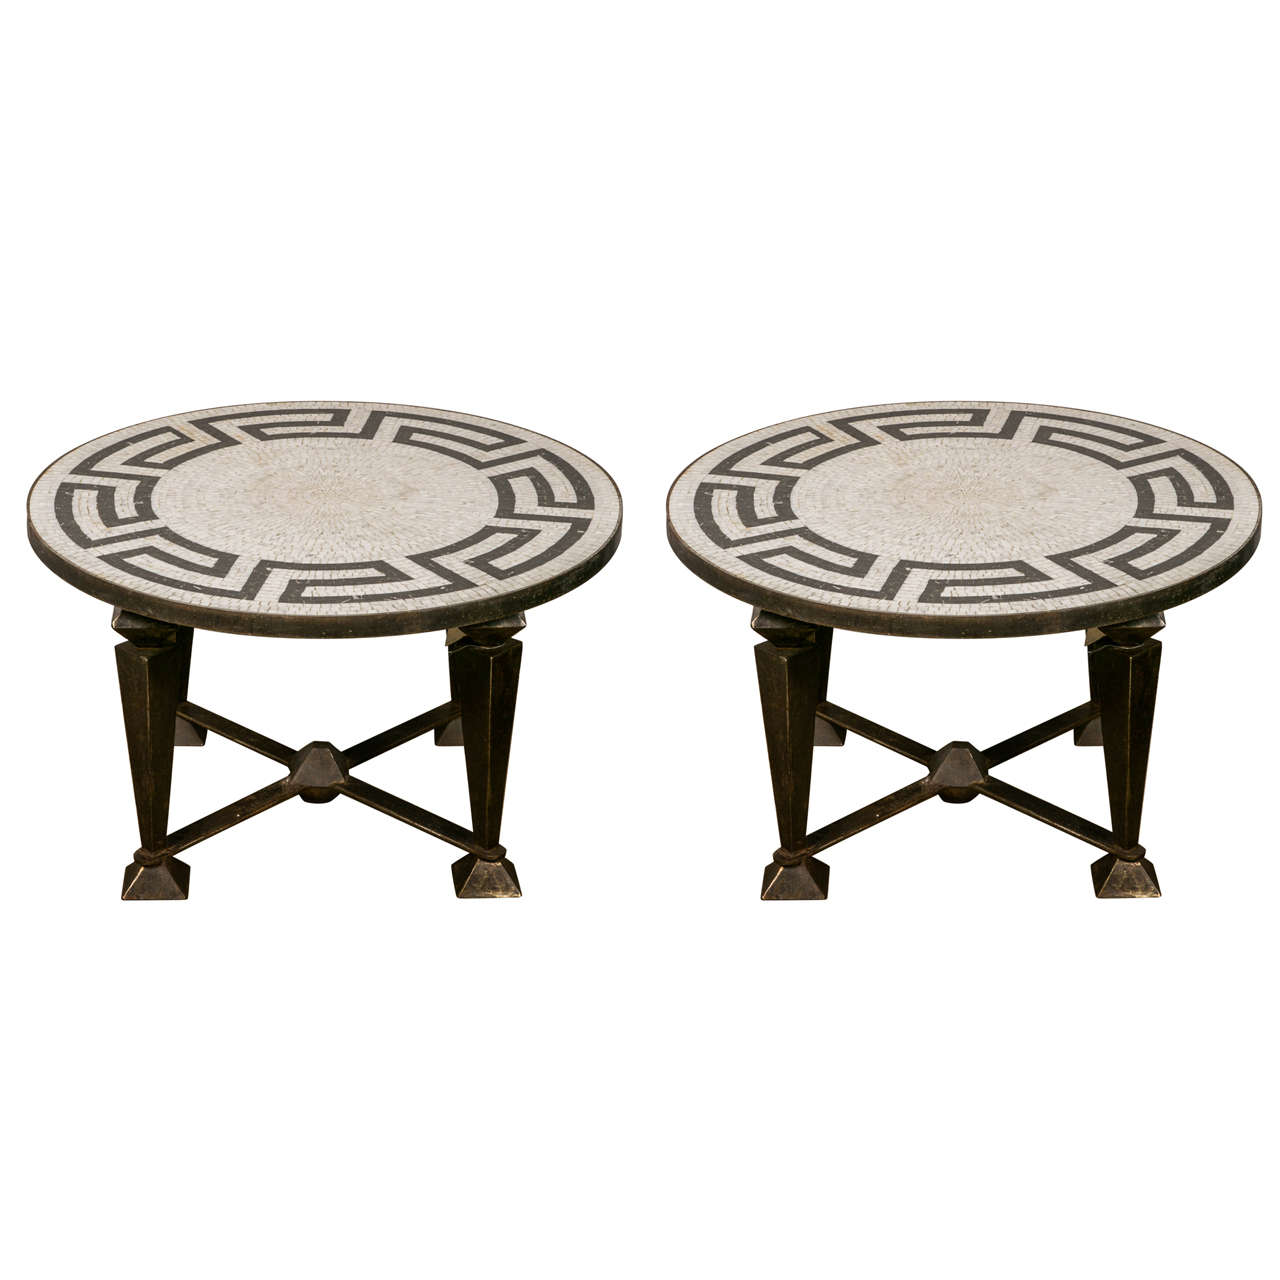 Pair of Neoclassical Mosaic Top Tables on Metal Base